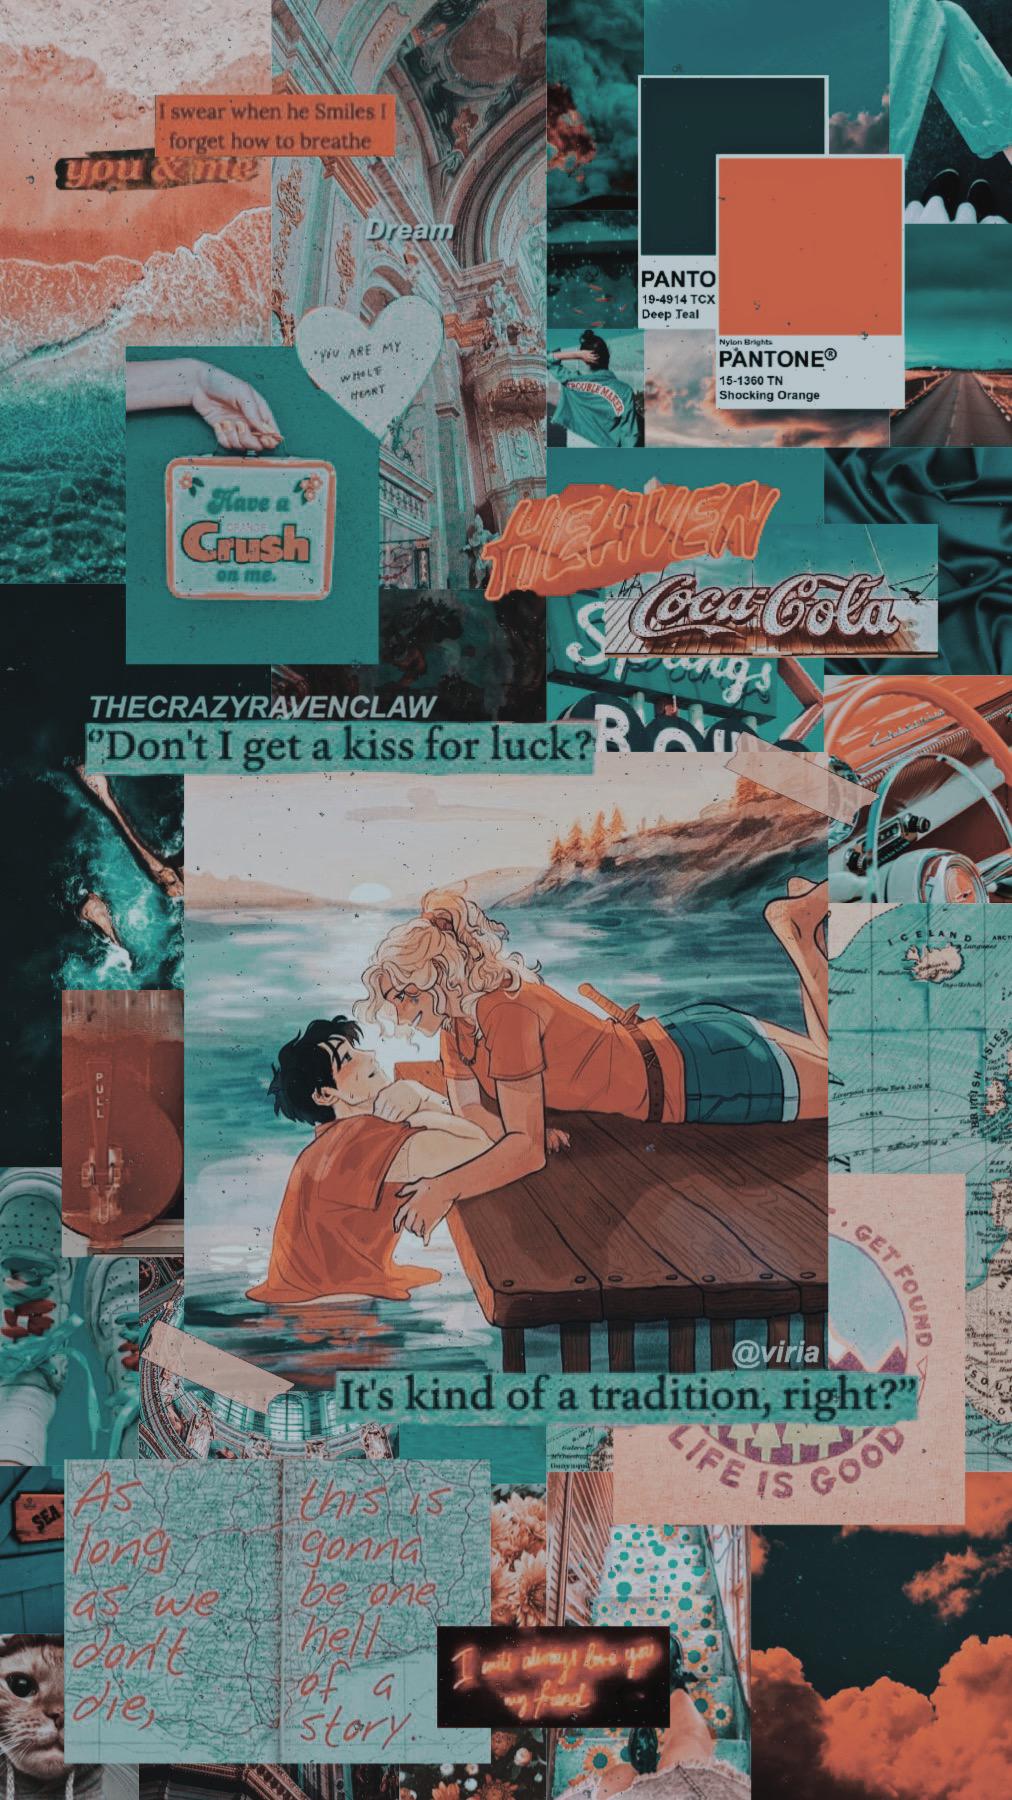 “come back alive, seaweed brain. then we’ll see.”
some good good percabeth content to give u warm and fuzzy feelings during these stressful times:)) been loving this orange and teal aesthetic lately idk why but it cool🧡 comments!